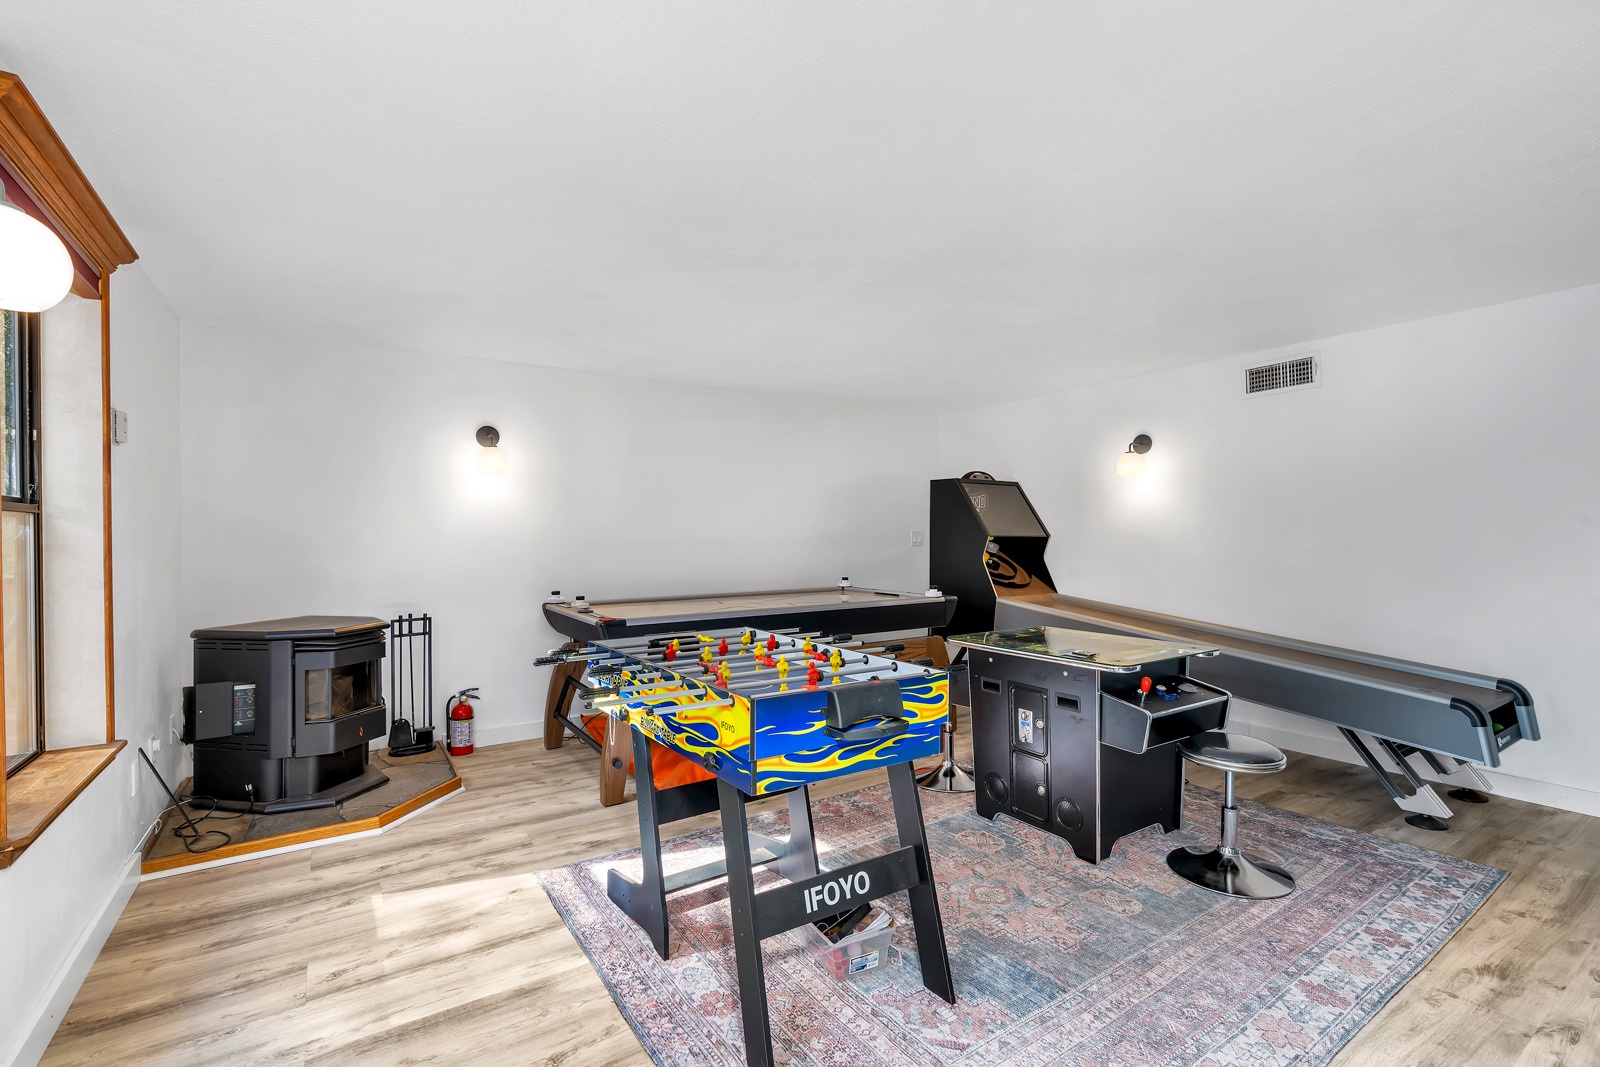 Game room in the basement